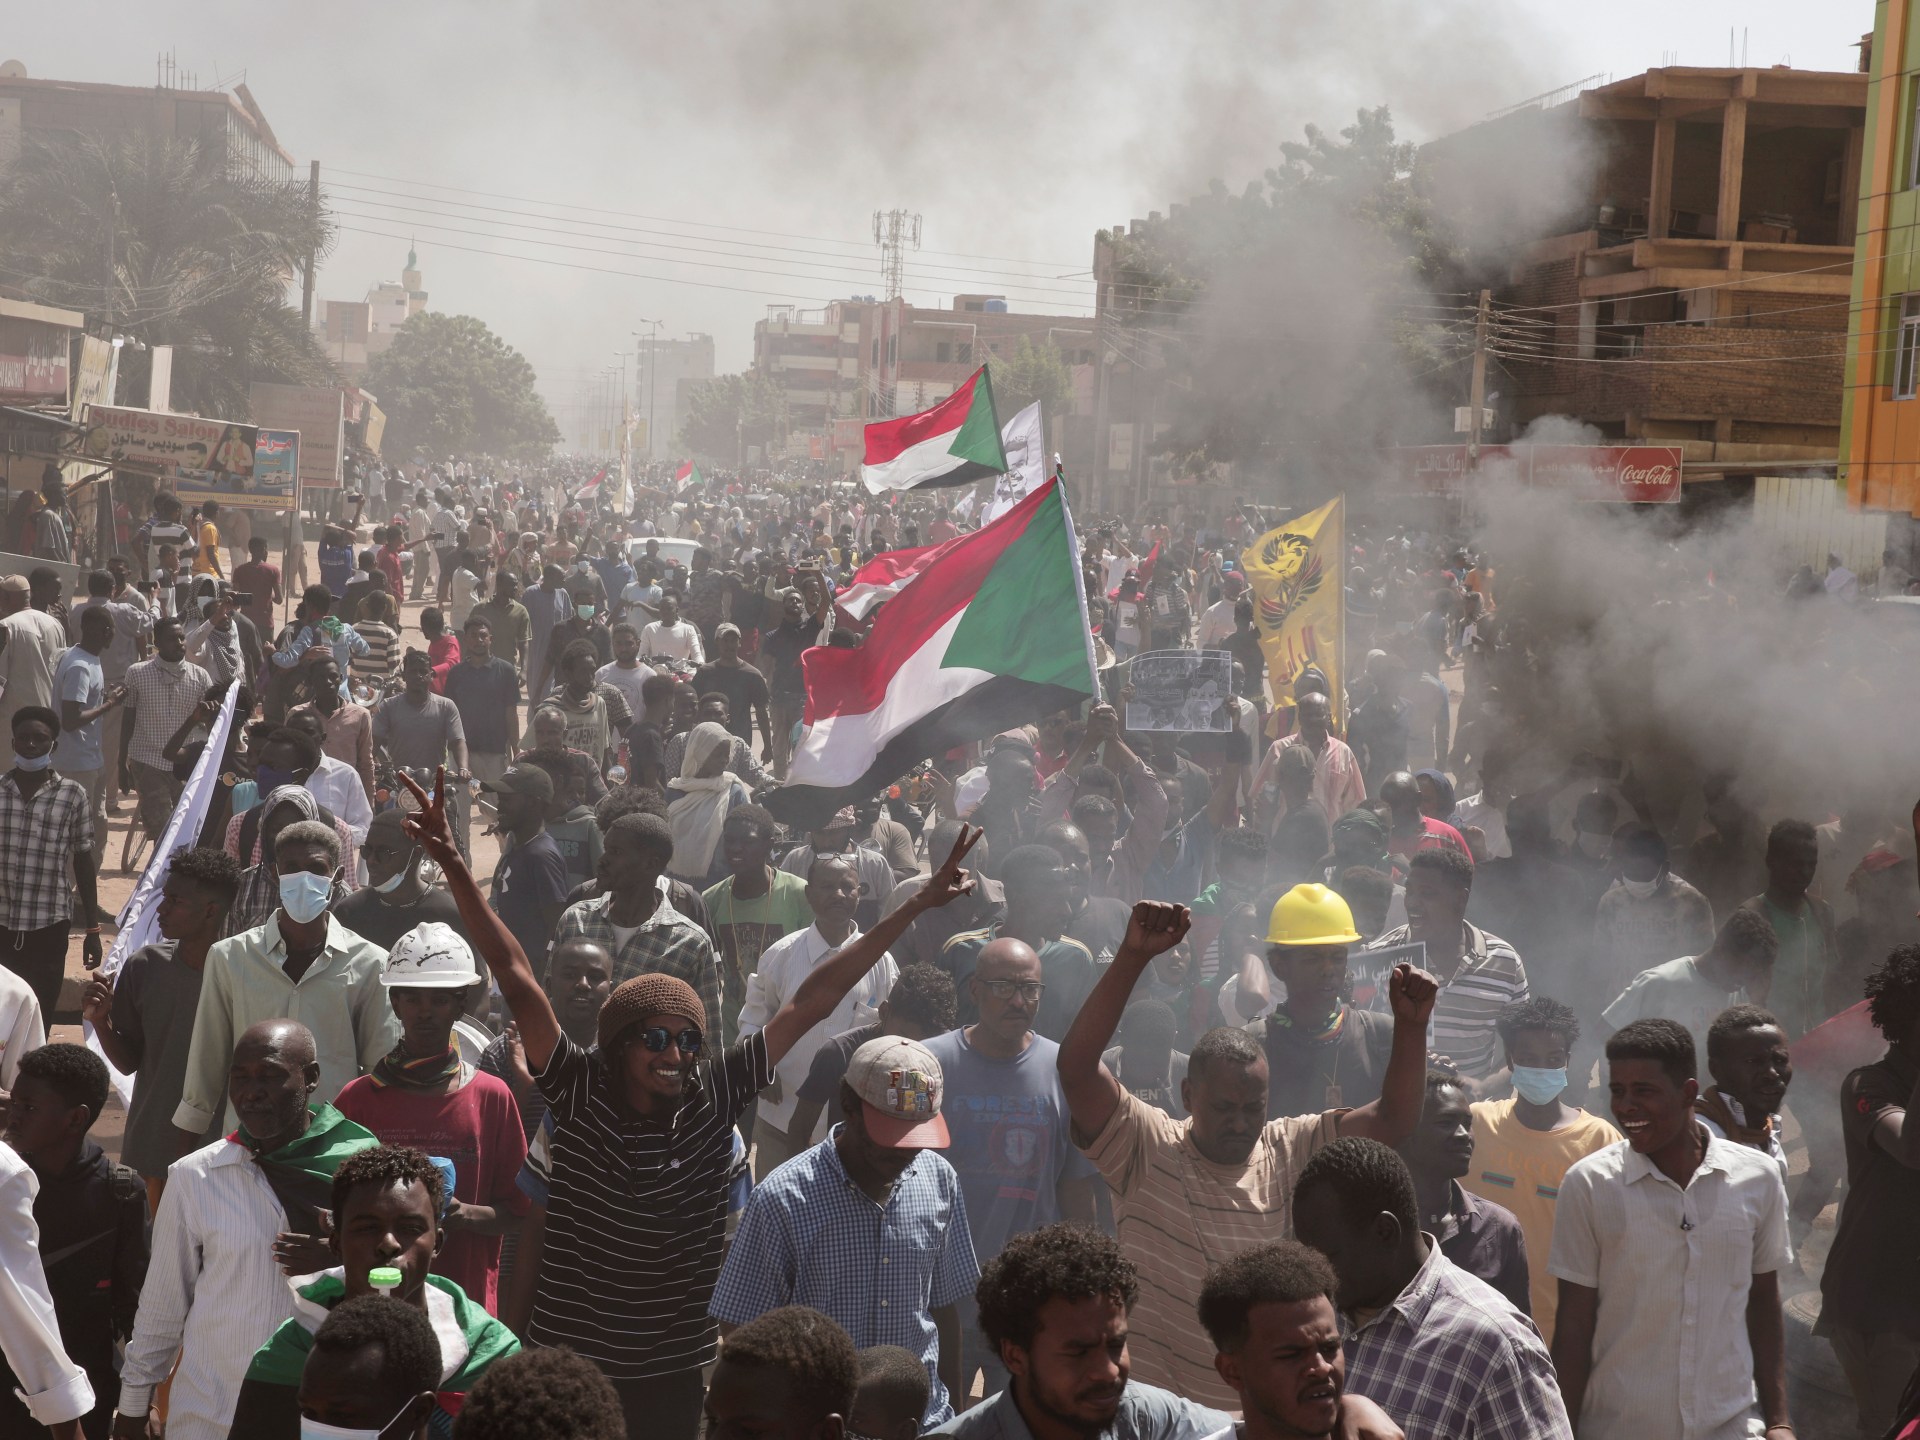 Sudan should not settle for anything other than true democracy | Opinions